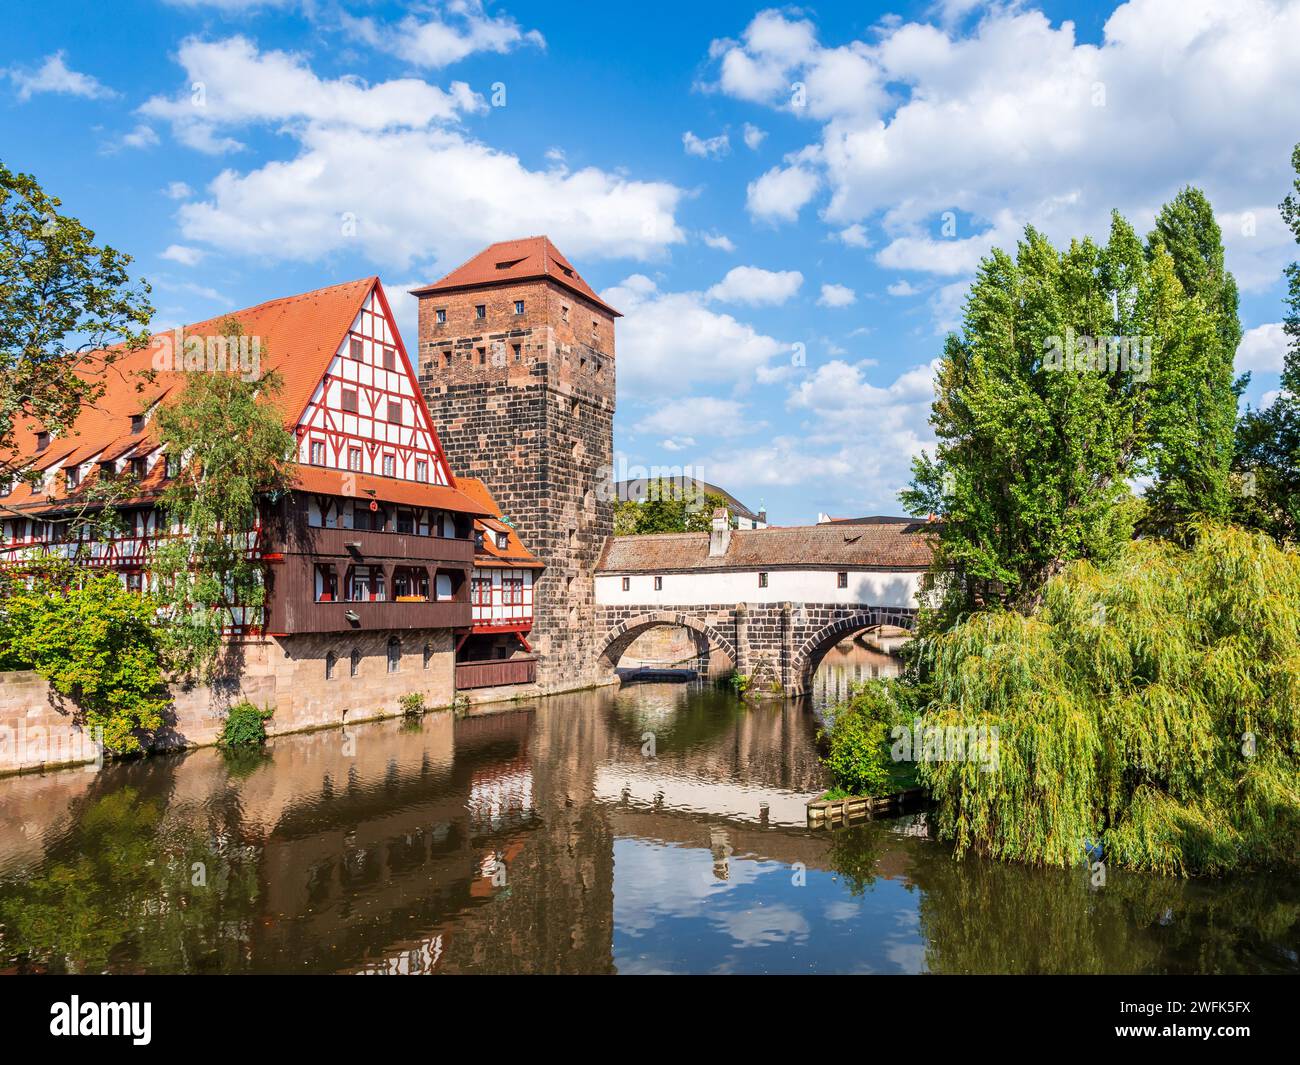 The Weinstadel half-timbered building and the Wasserturm stone tower in Nuremberg, Germany, overlooking the Pegnitz river and the Henkerbrücke. Stock Photo